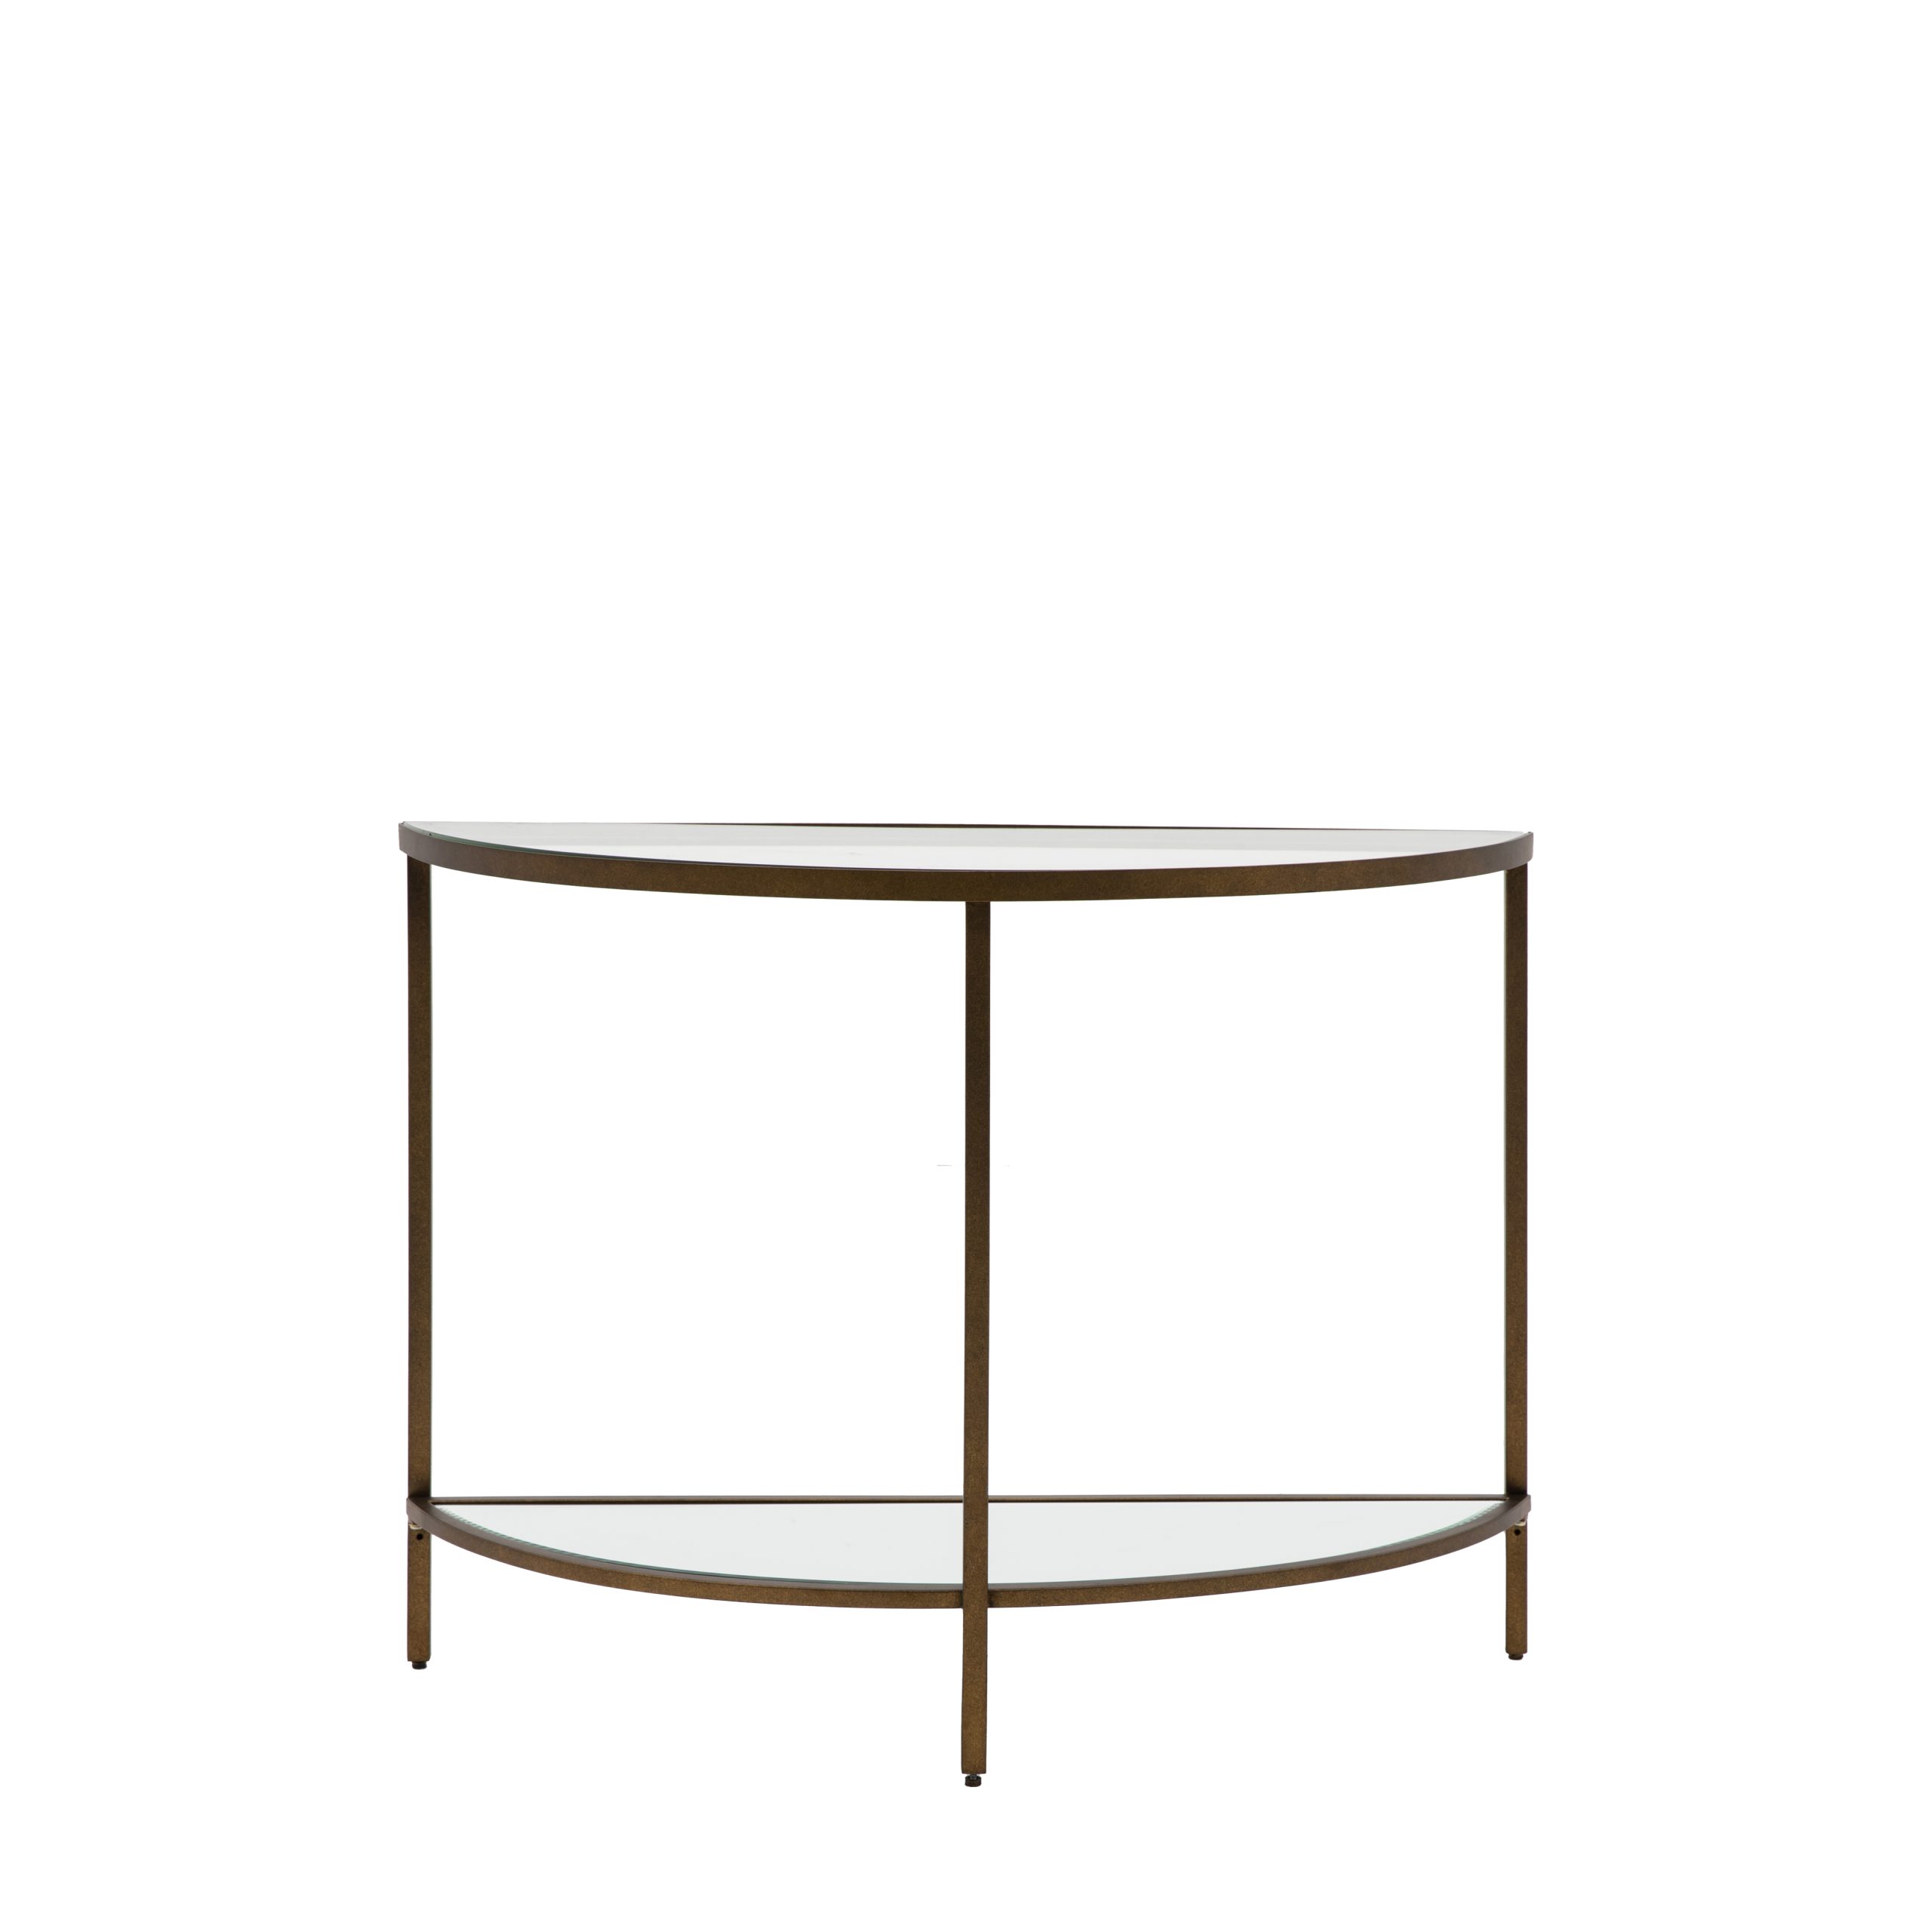 Gallery Direct Hudson Console Table